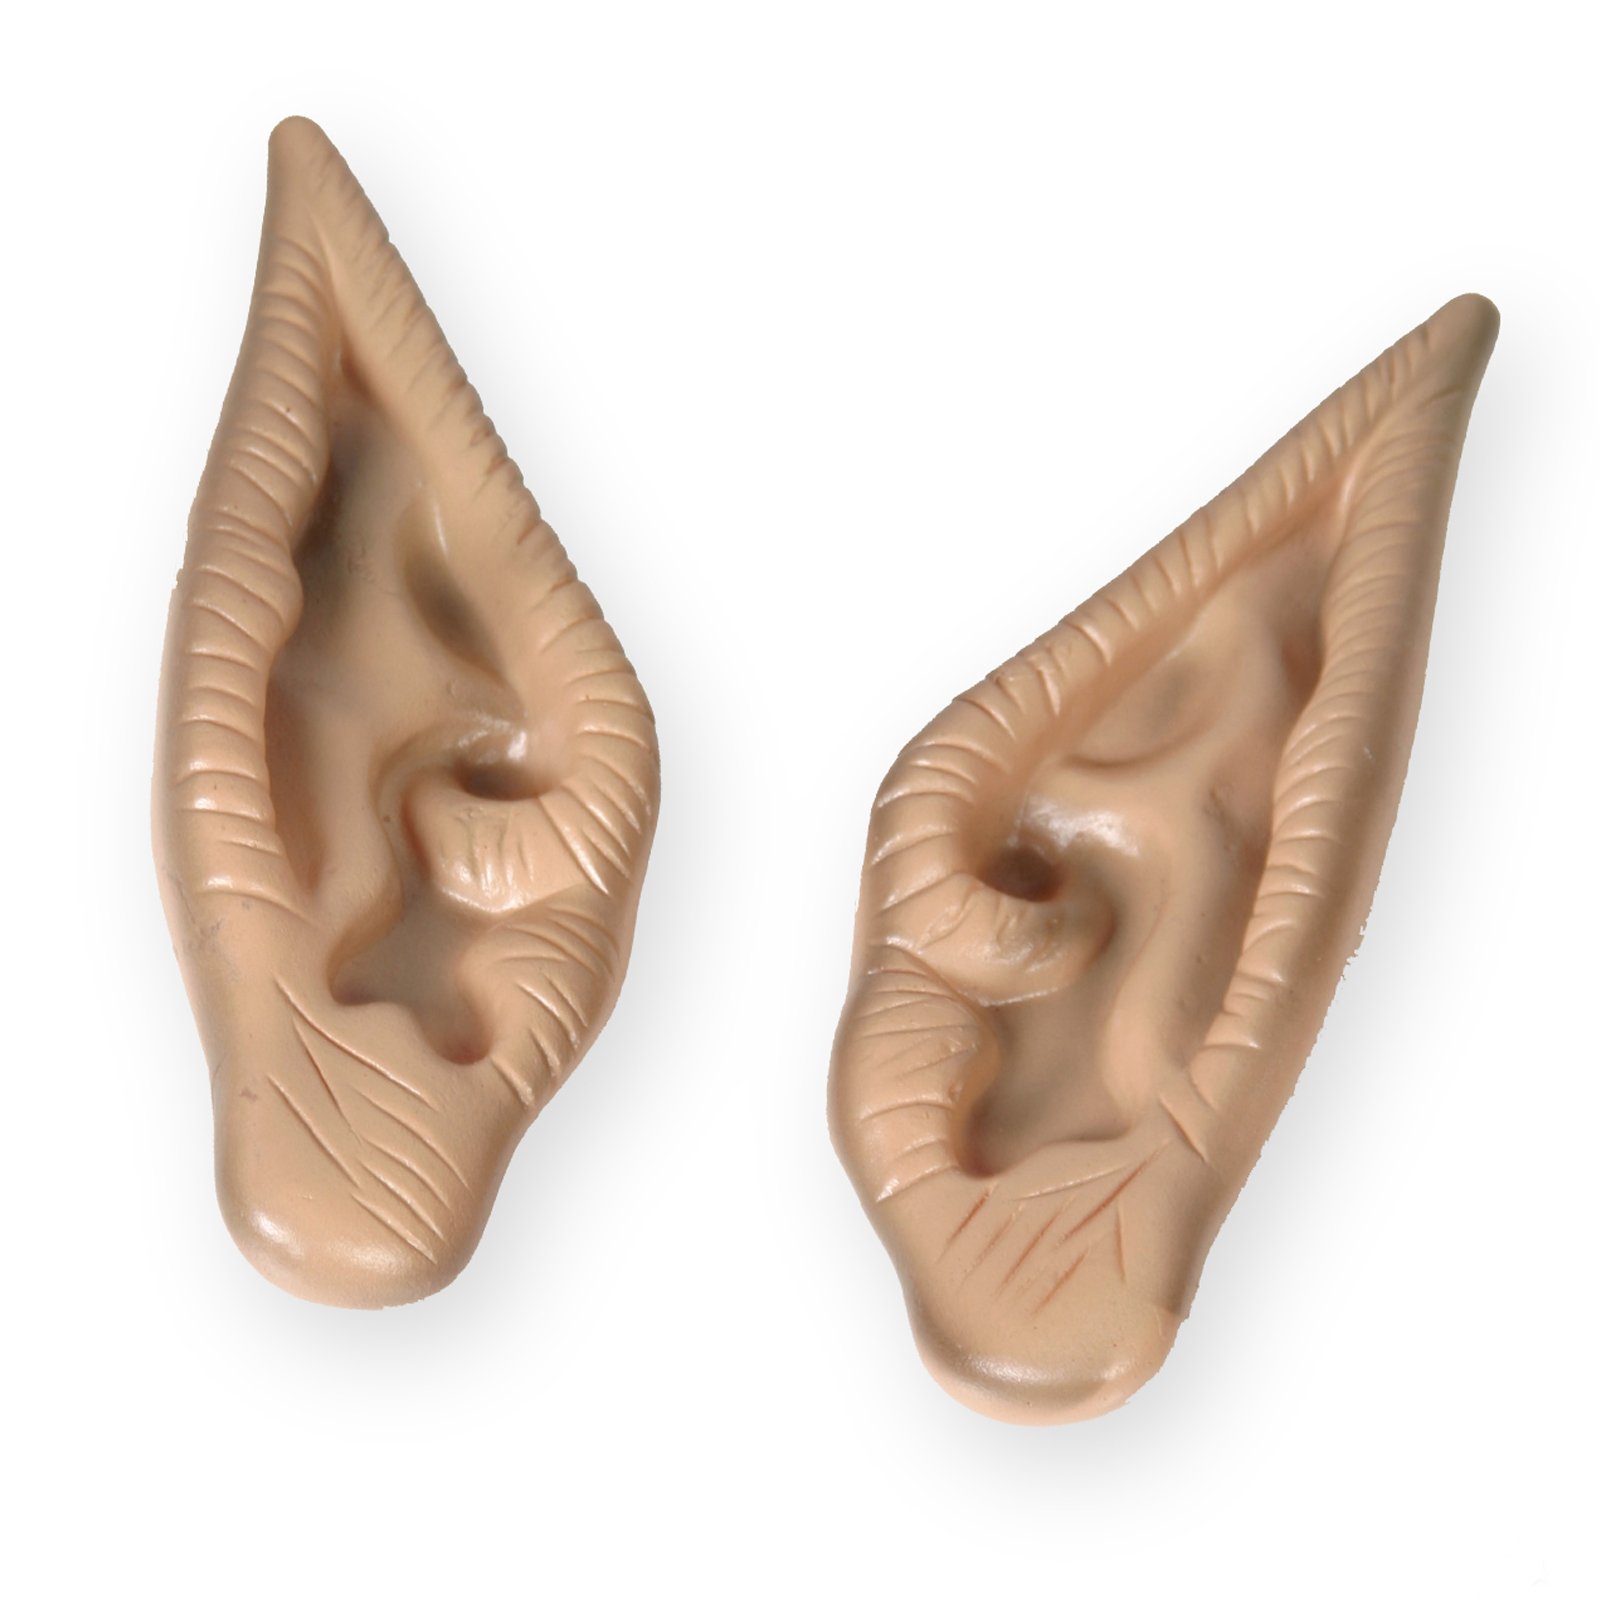 Elf Ears   Includes One Pair Of Elf Ears One Size Fits Most